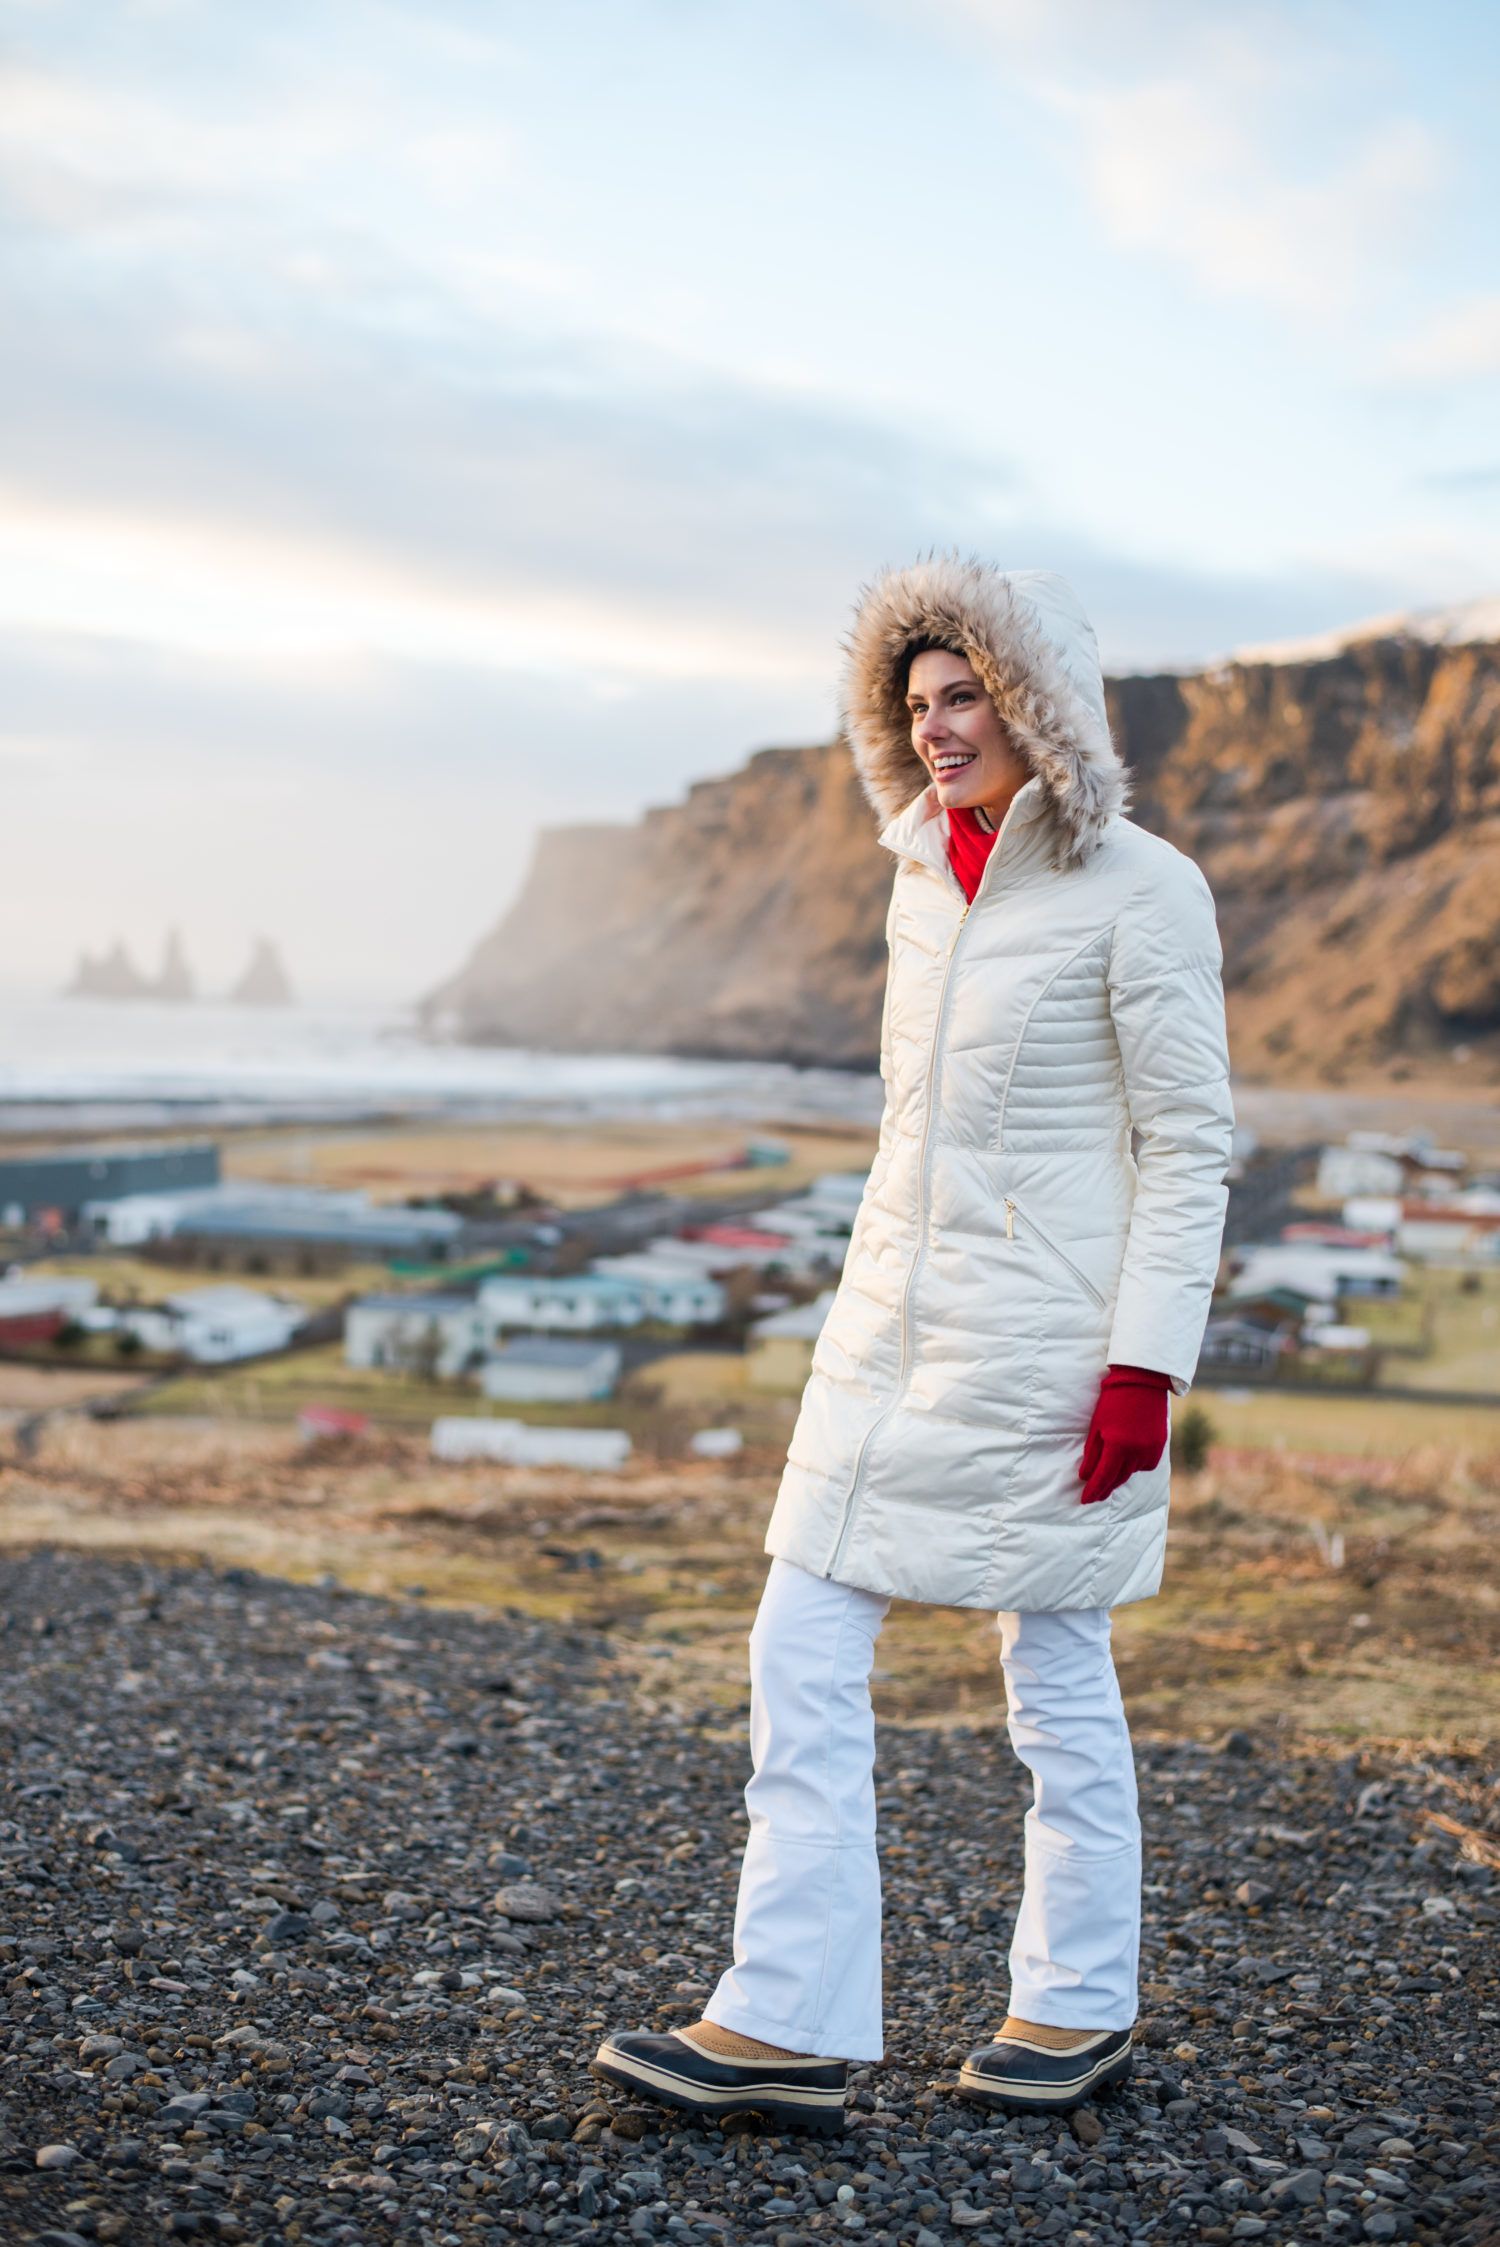 Miss USA 2011 Alyssa Campanella of The A List blog wearing Ellen Tracy faux fur coat and Sorel Caribou boots in Iceland